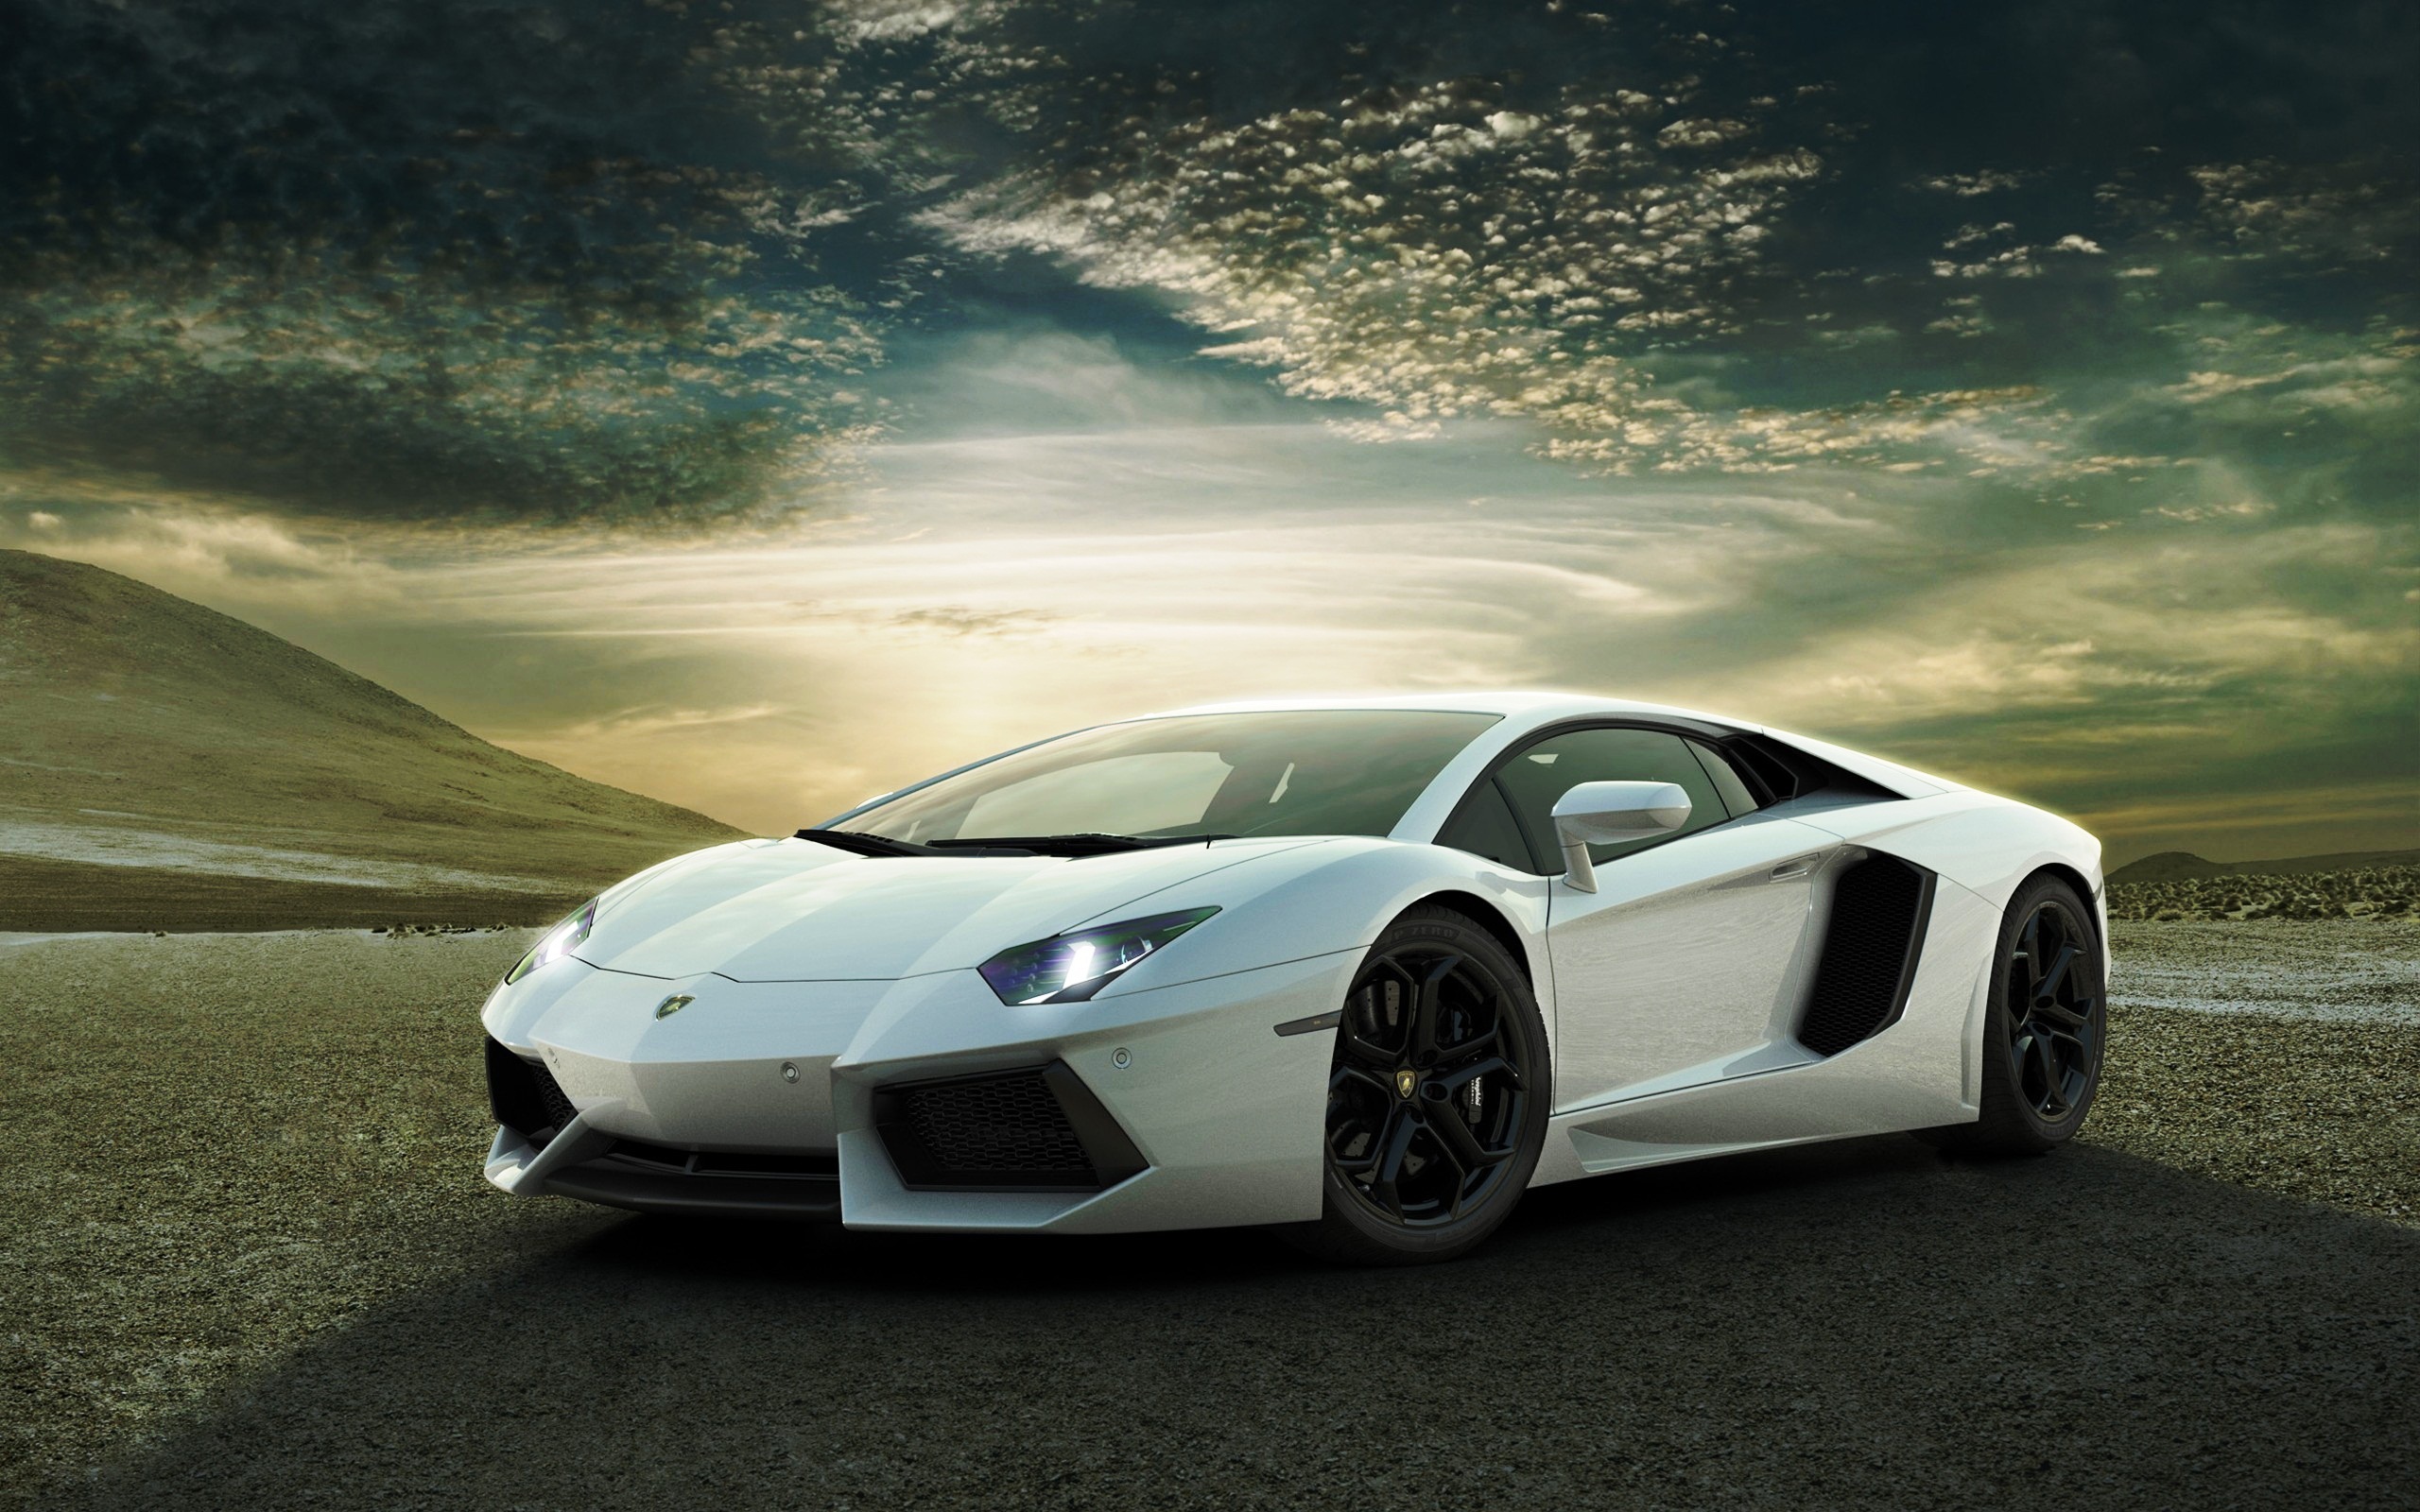 Lamborghini Aventador Wallpapers HD A34 White - lamborghini aventador desktop sports cars, race cars, luxury cars, expensive cars, wallpapers pictures images free download